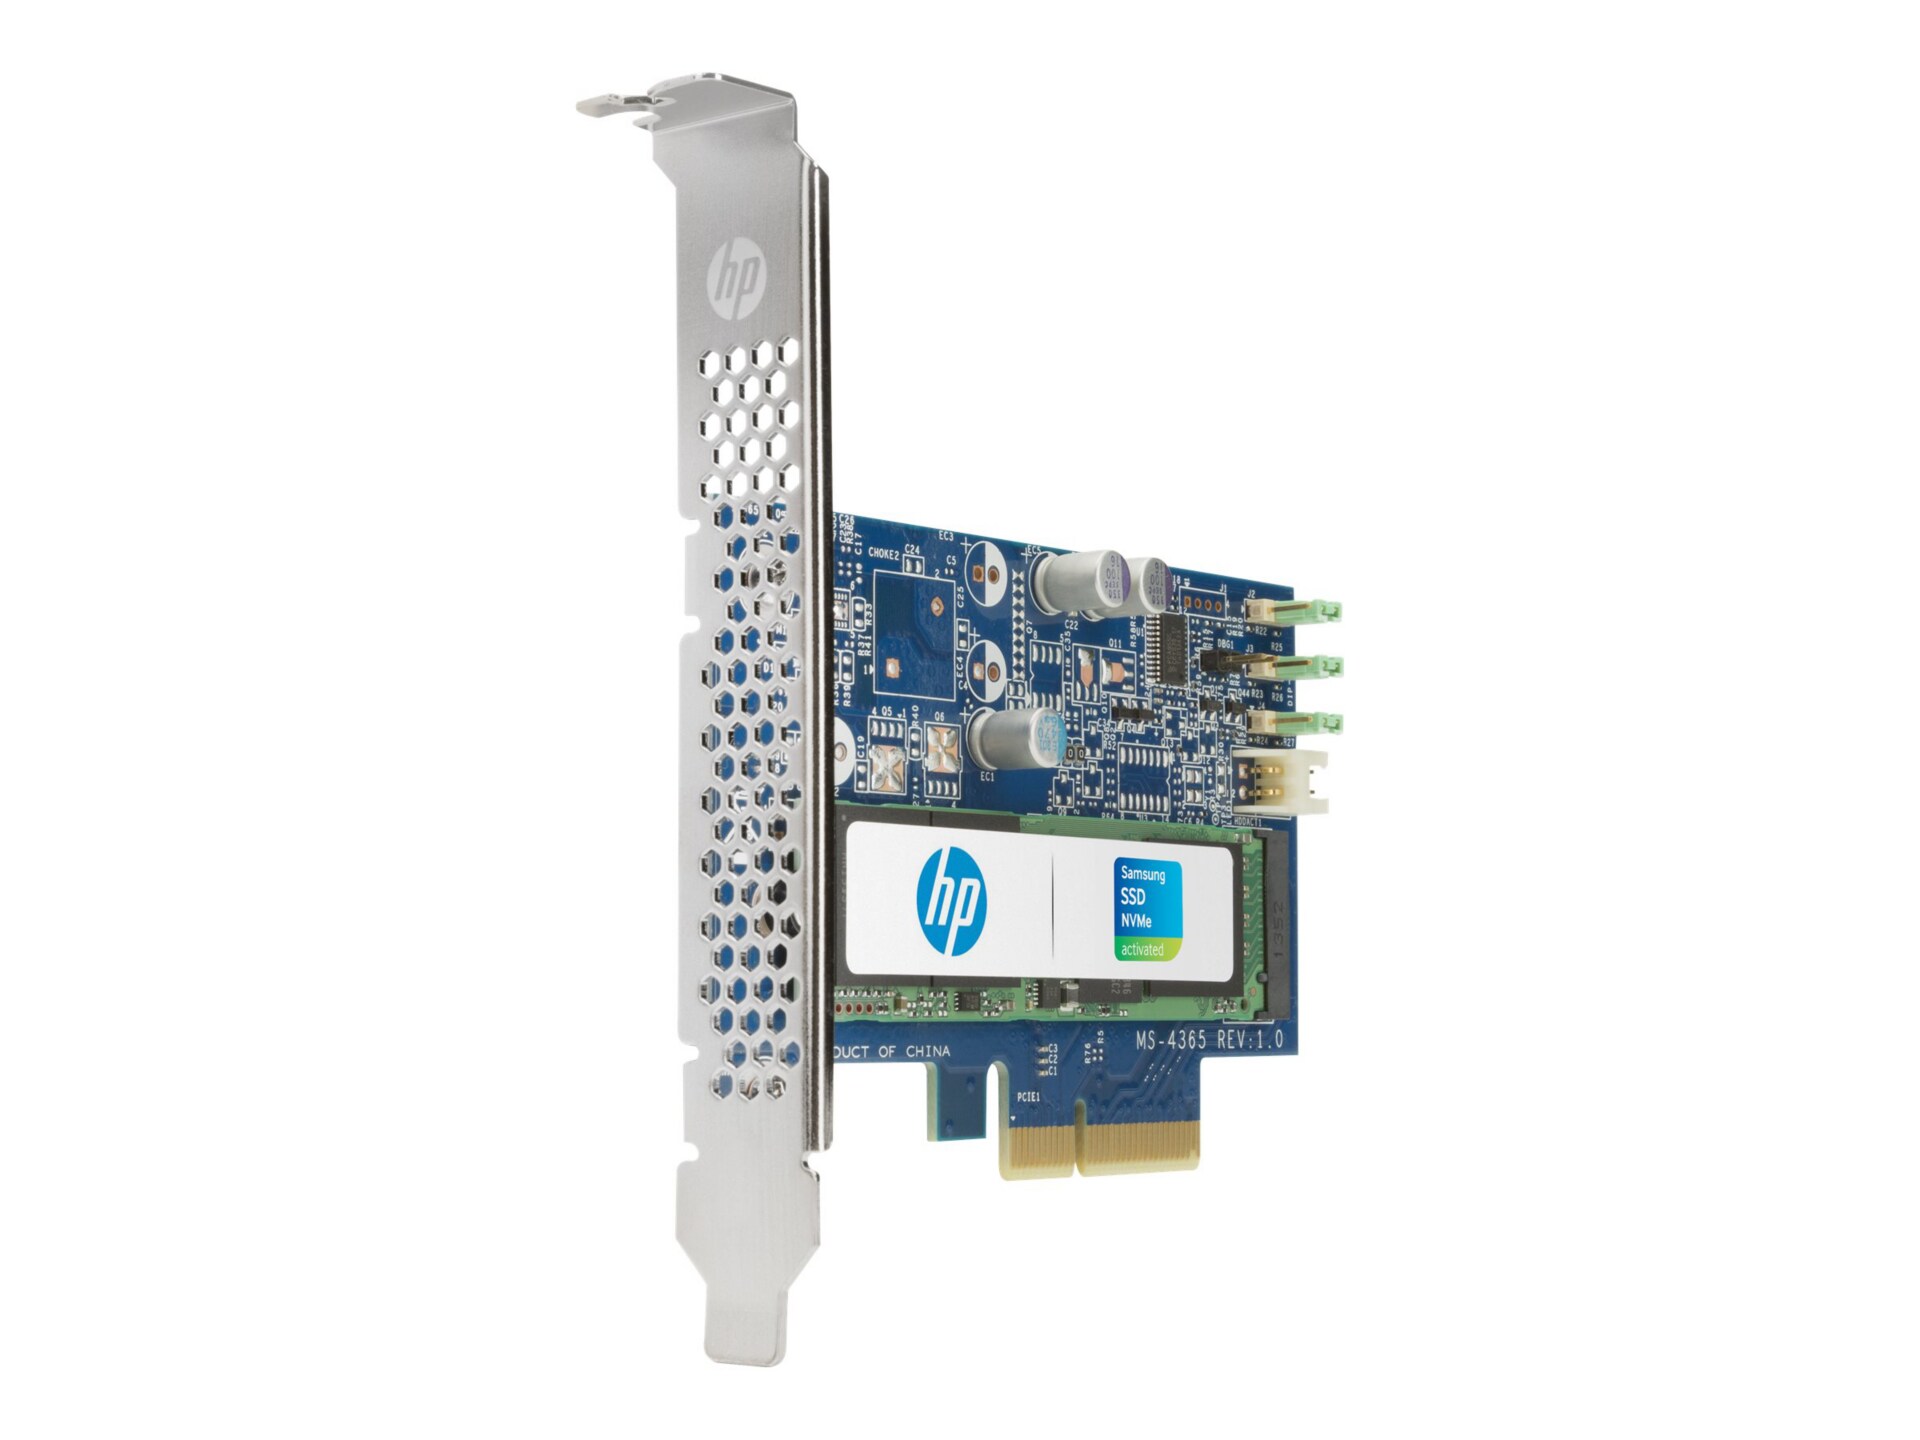 HP Z Turbo Drive G2 - solid state drive - 1 TB - PCI Express 3.0 x4 (NVMe)